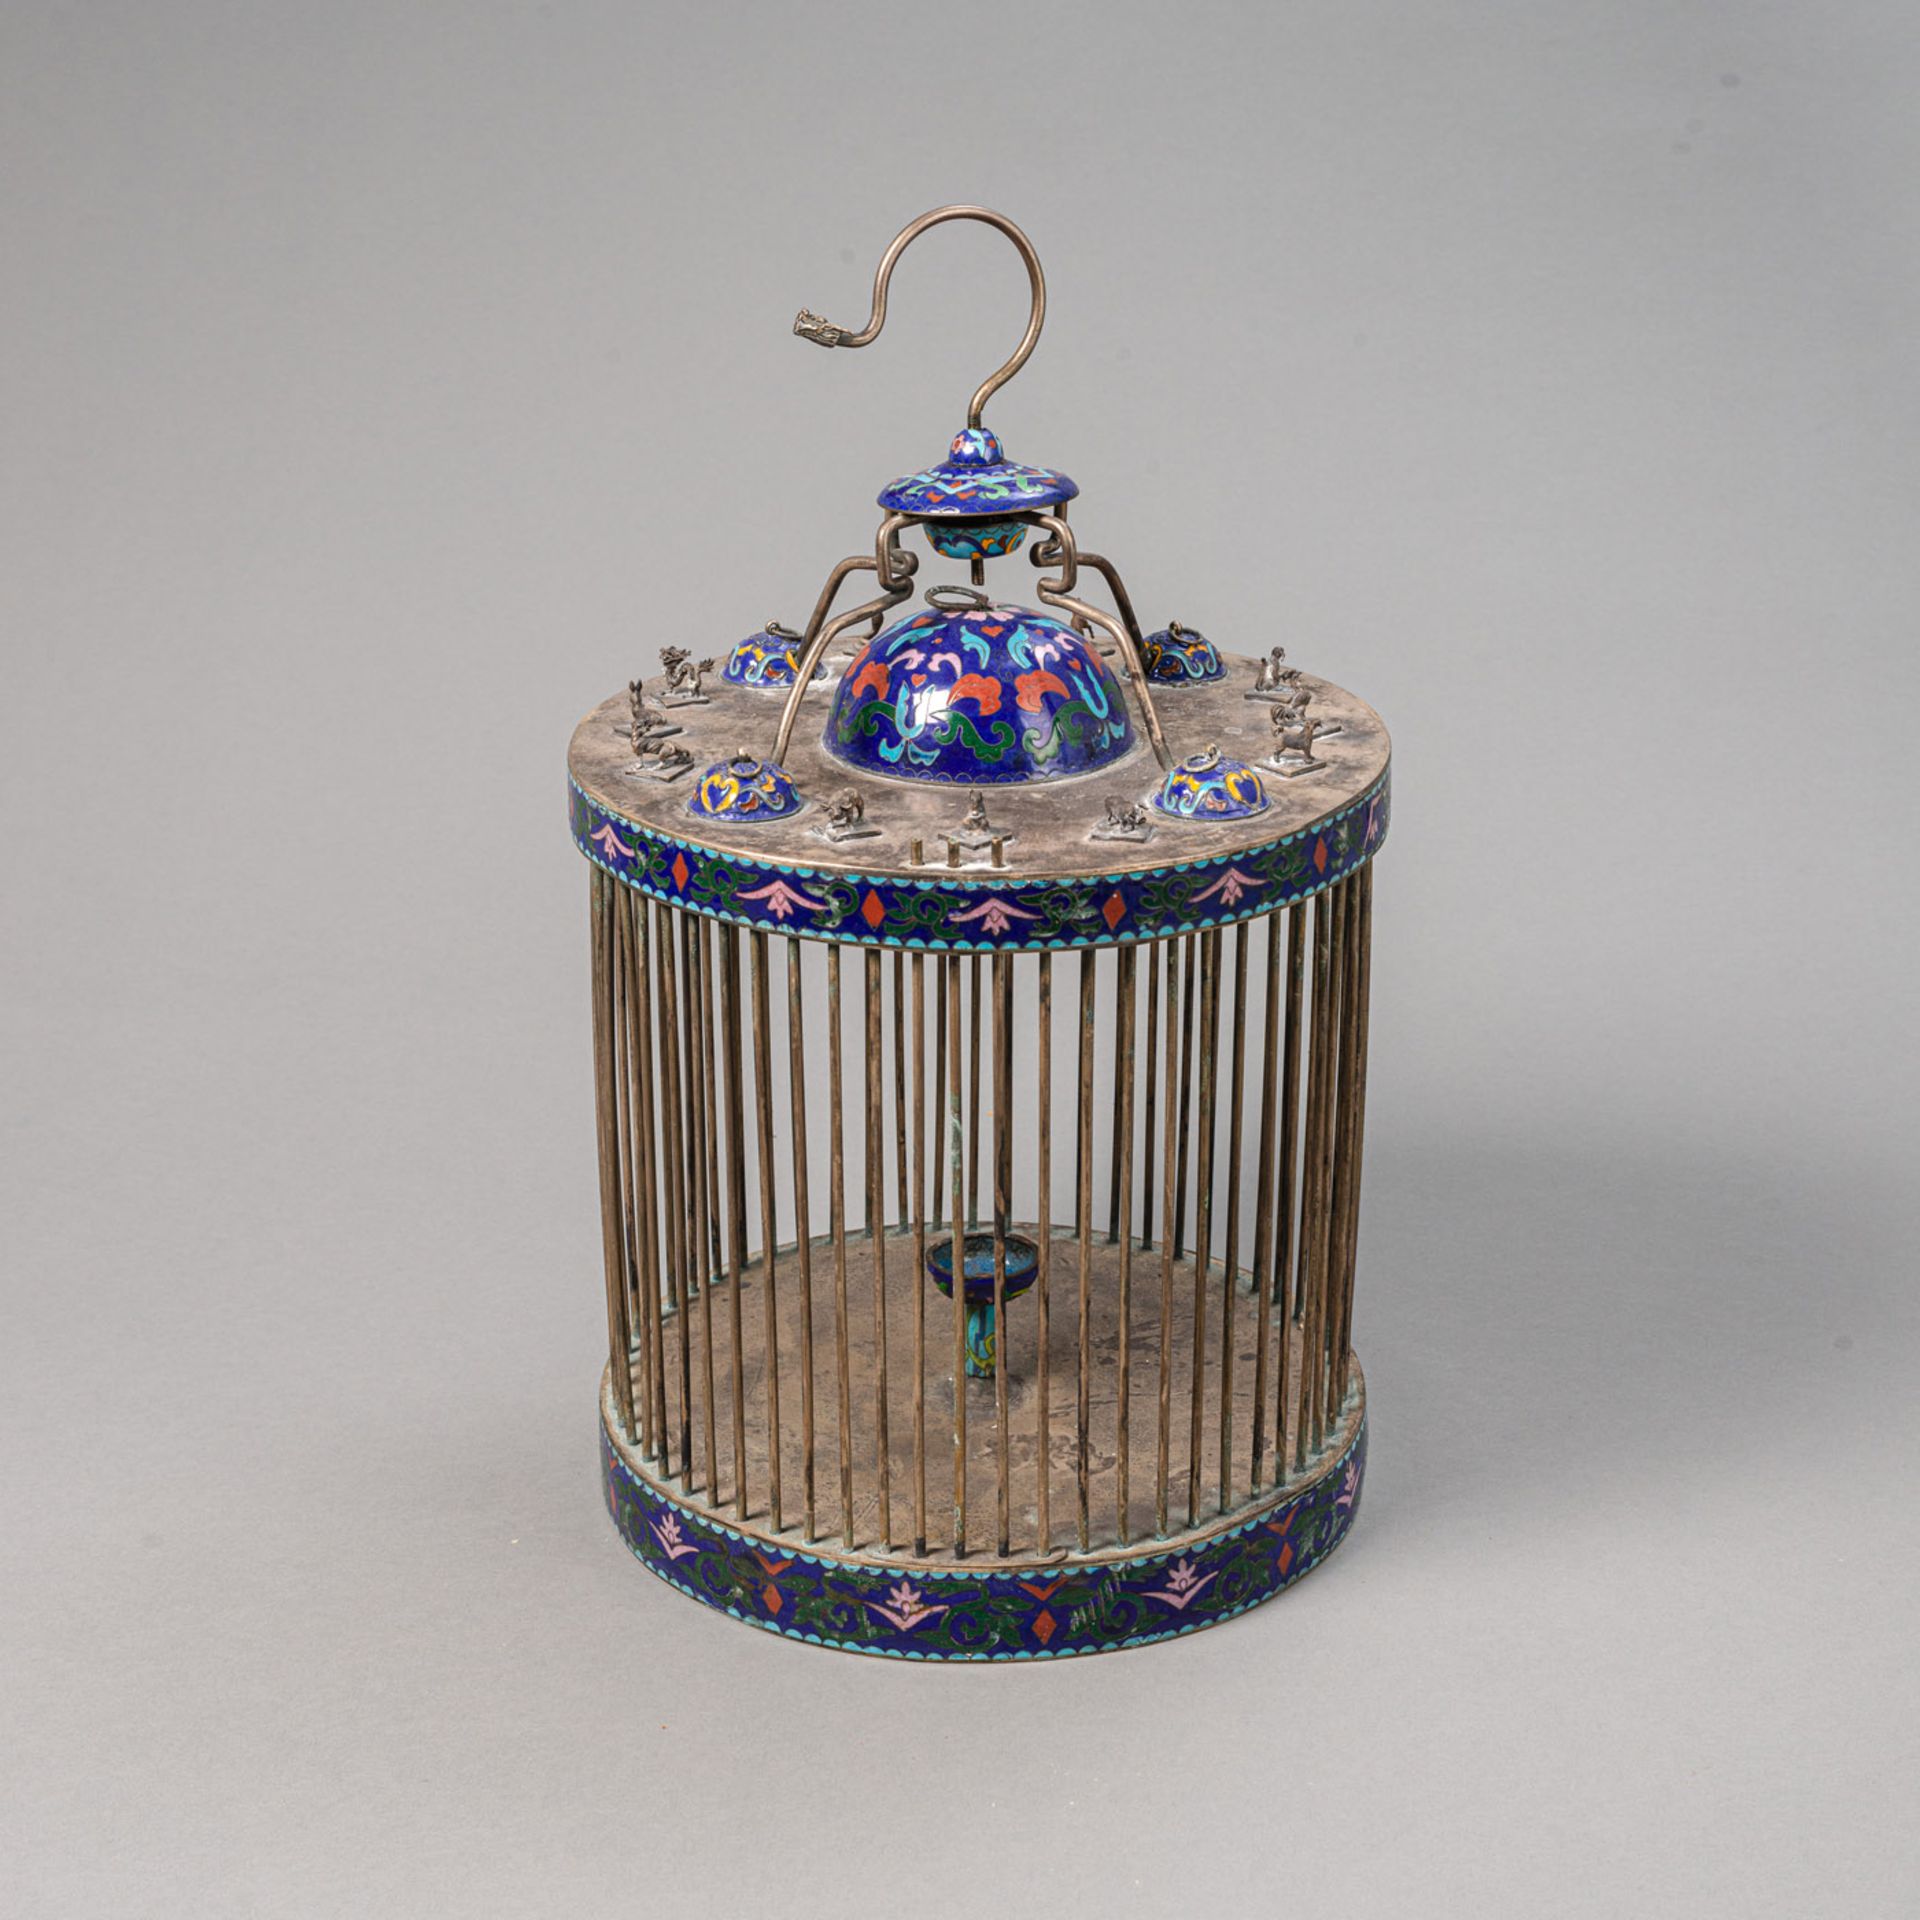 A SILVERED ENAMEL-DECORATED BIRD CAGE